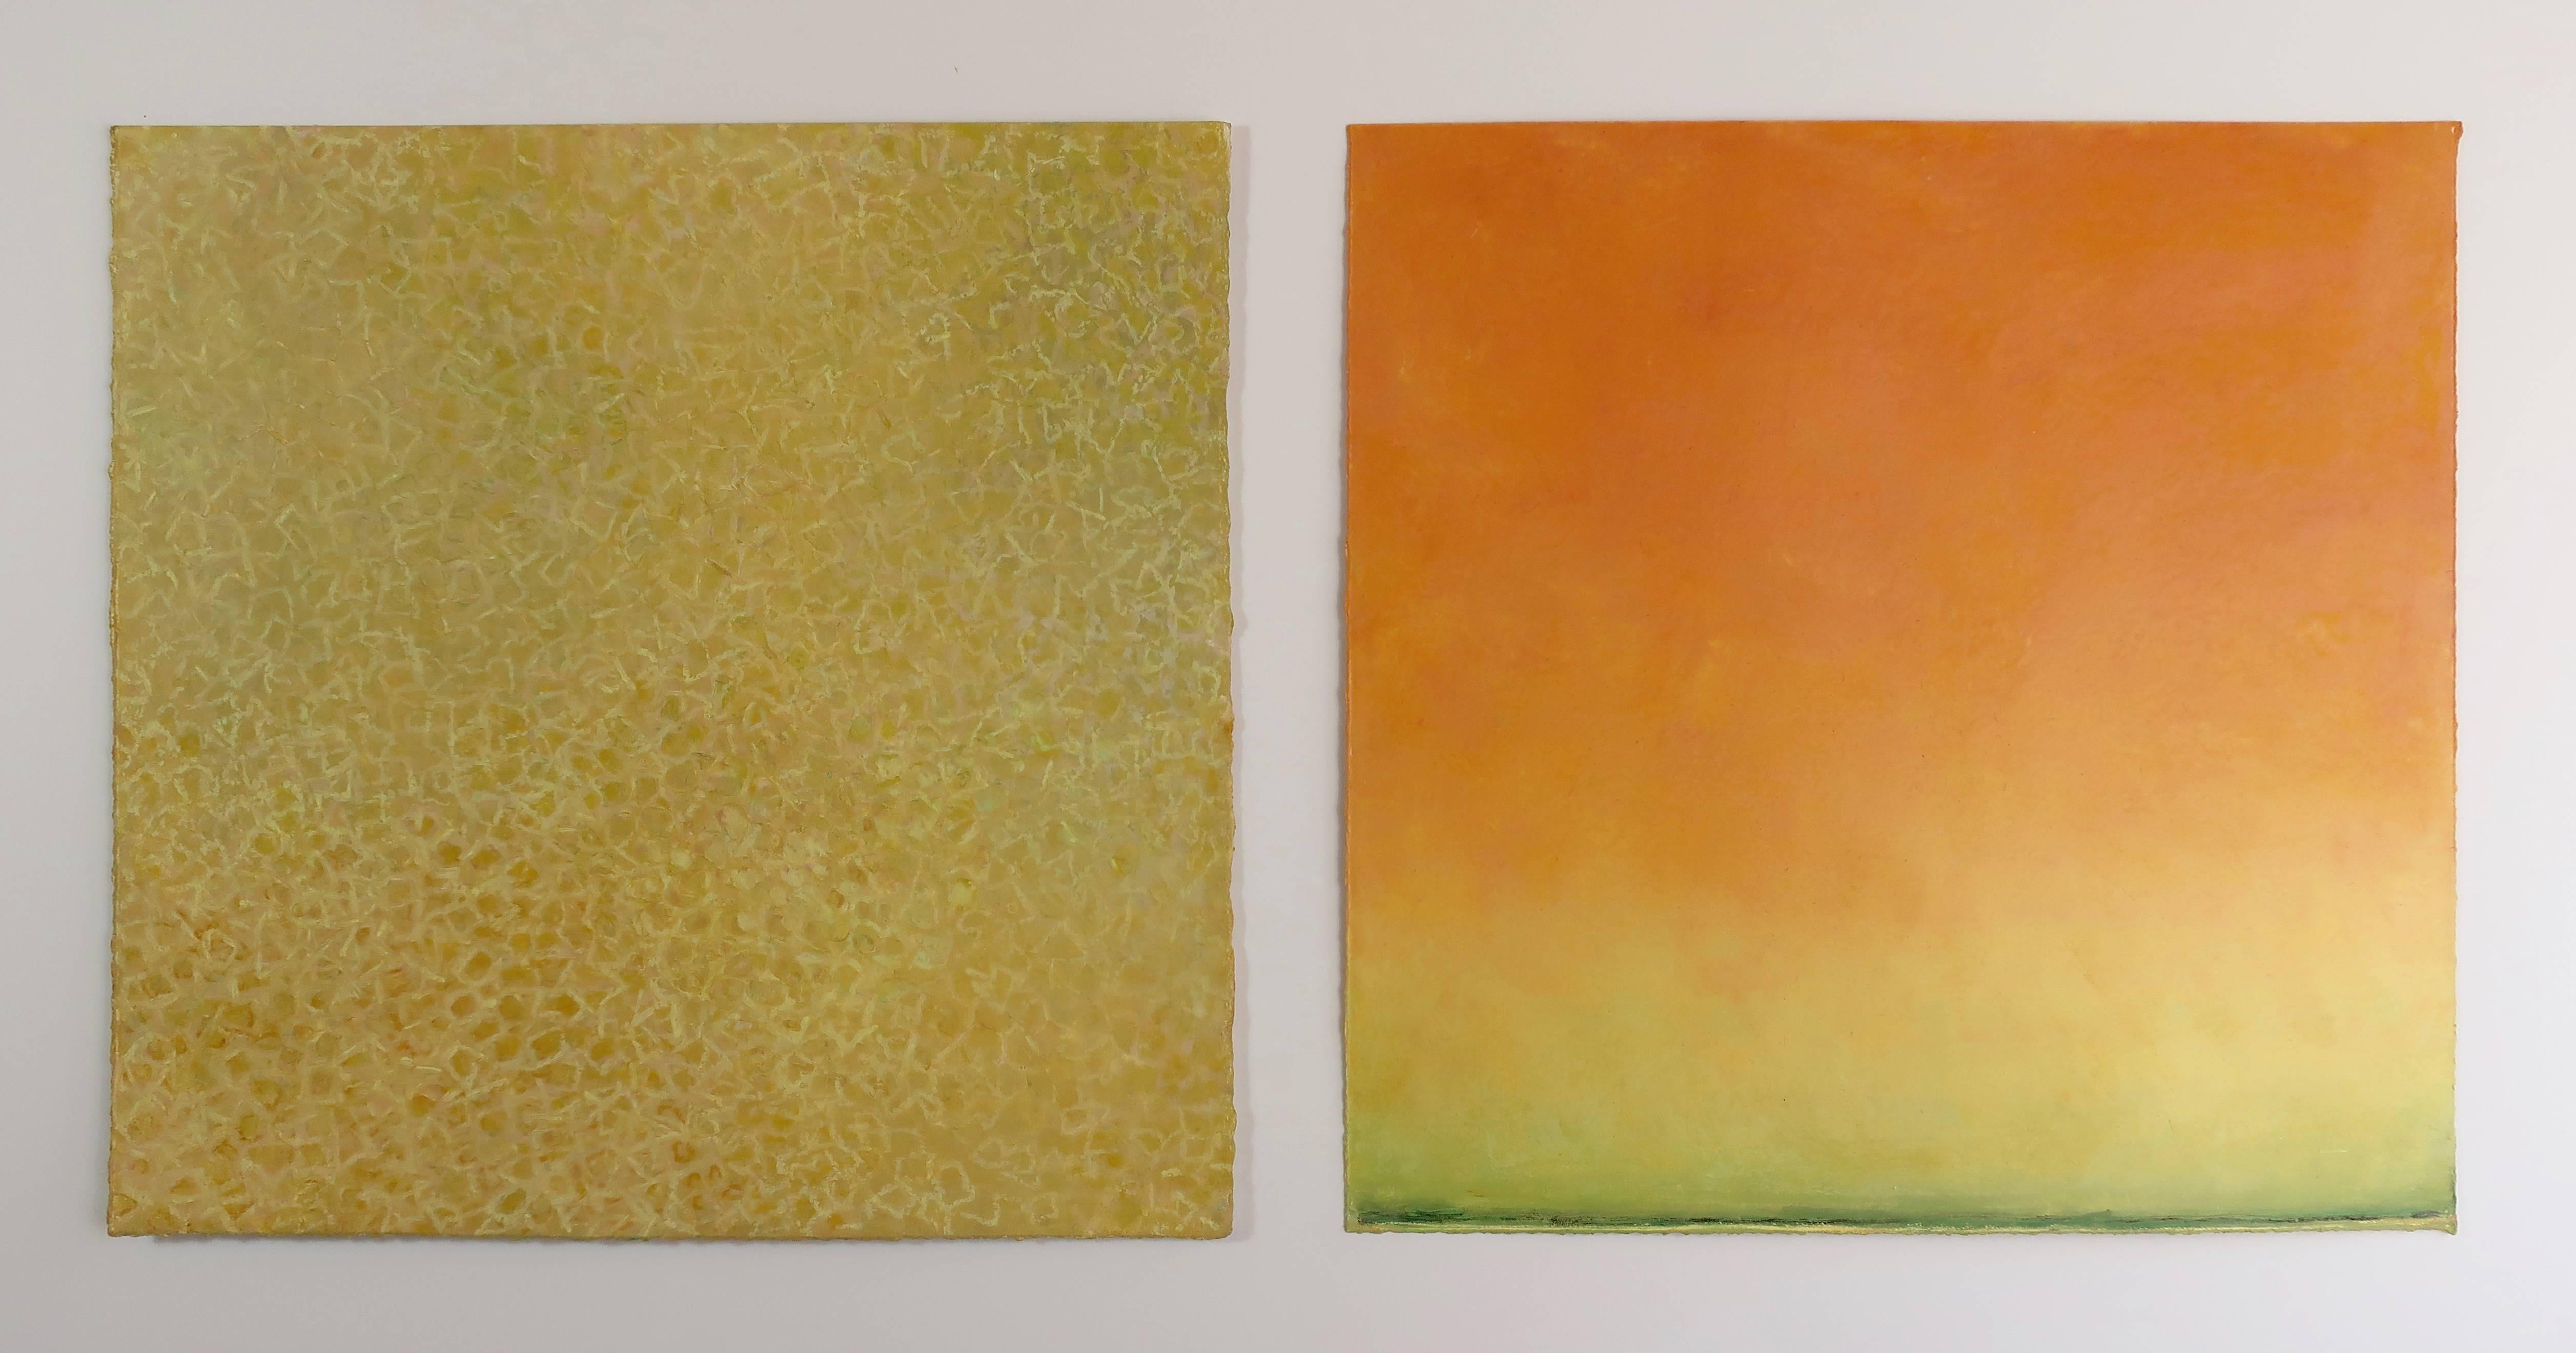 Daisy Craddock's oil stick and oil pastel on Arches paper diptych, Cantaloupe 1st, 2018, treads the boundaries of abstraction and hyperrealism. The left side of the diptych shows the rough, intricately patterned rind of the fruit, while the right